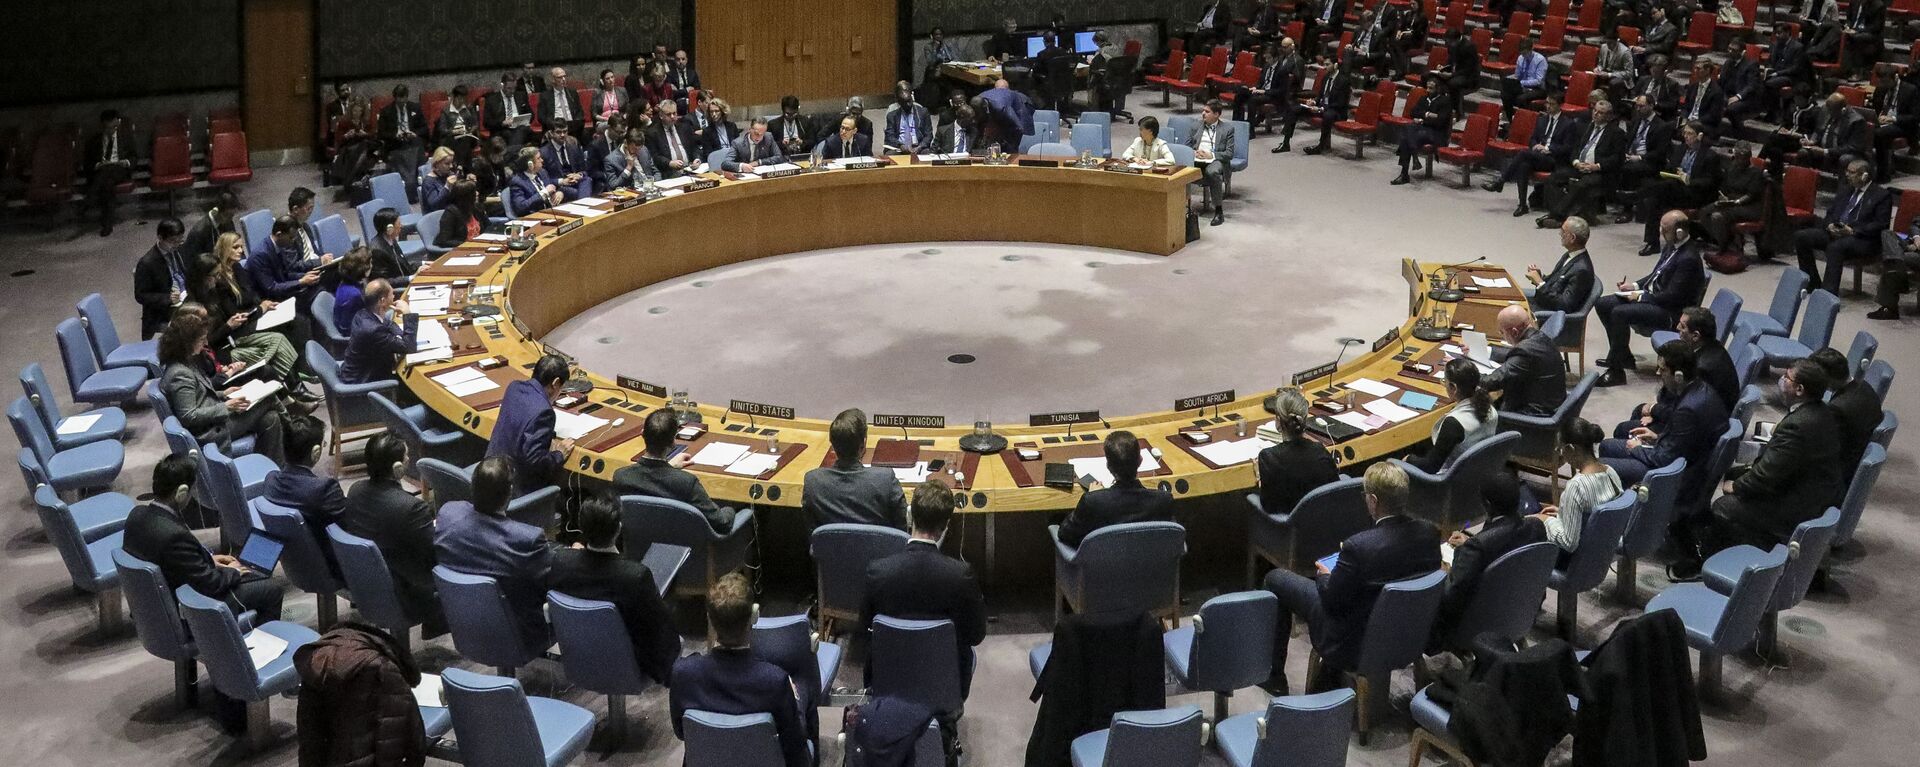 Members of the United Nations Security Council, with visiting German Foreign Minister Heiko Maas, convene a meeting on the nuclear non-proliferation treaty, Wednesday, Feb. 26, 2020, at U.N. headquarters - Sputnik International, 1920, 24.07.2021